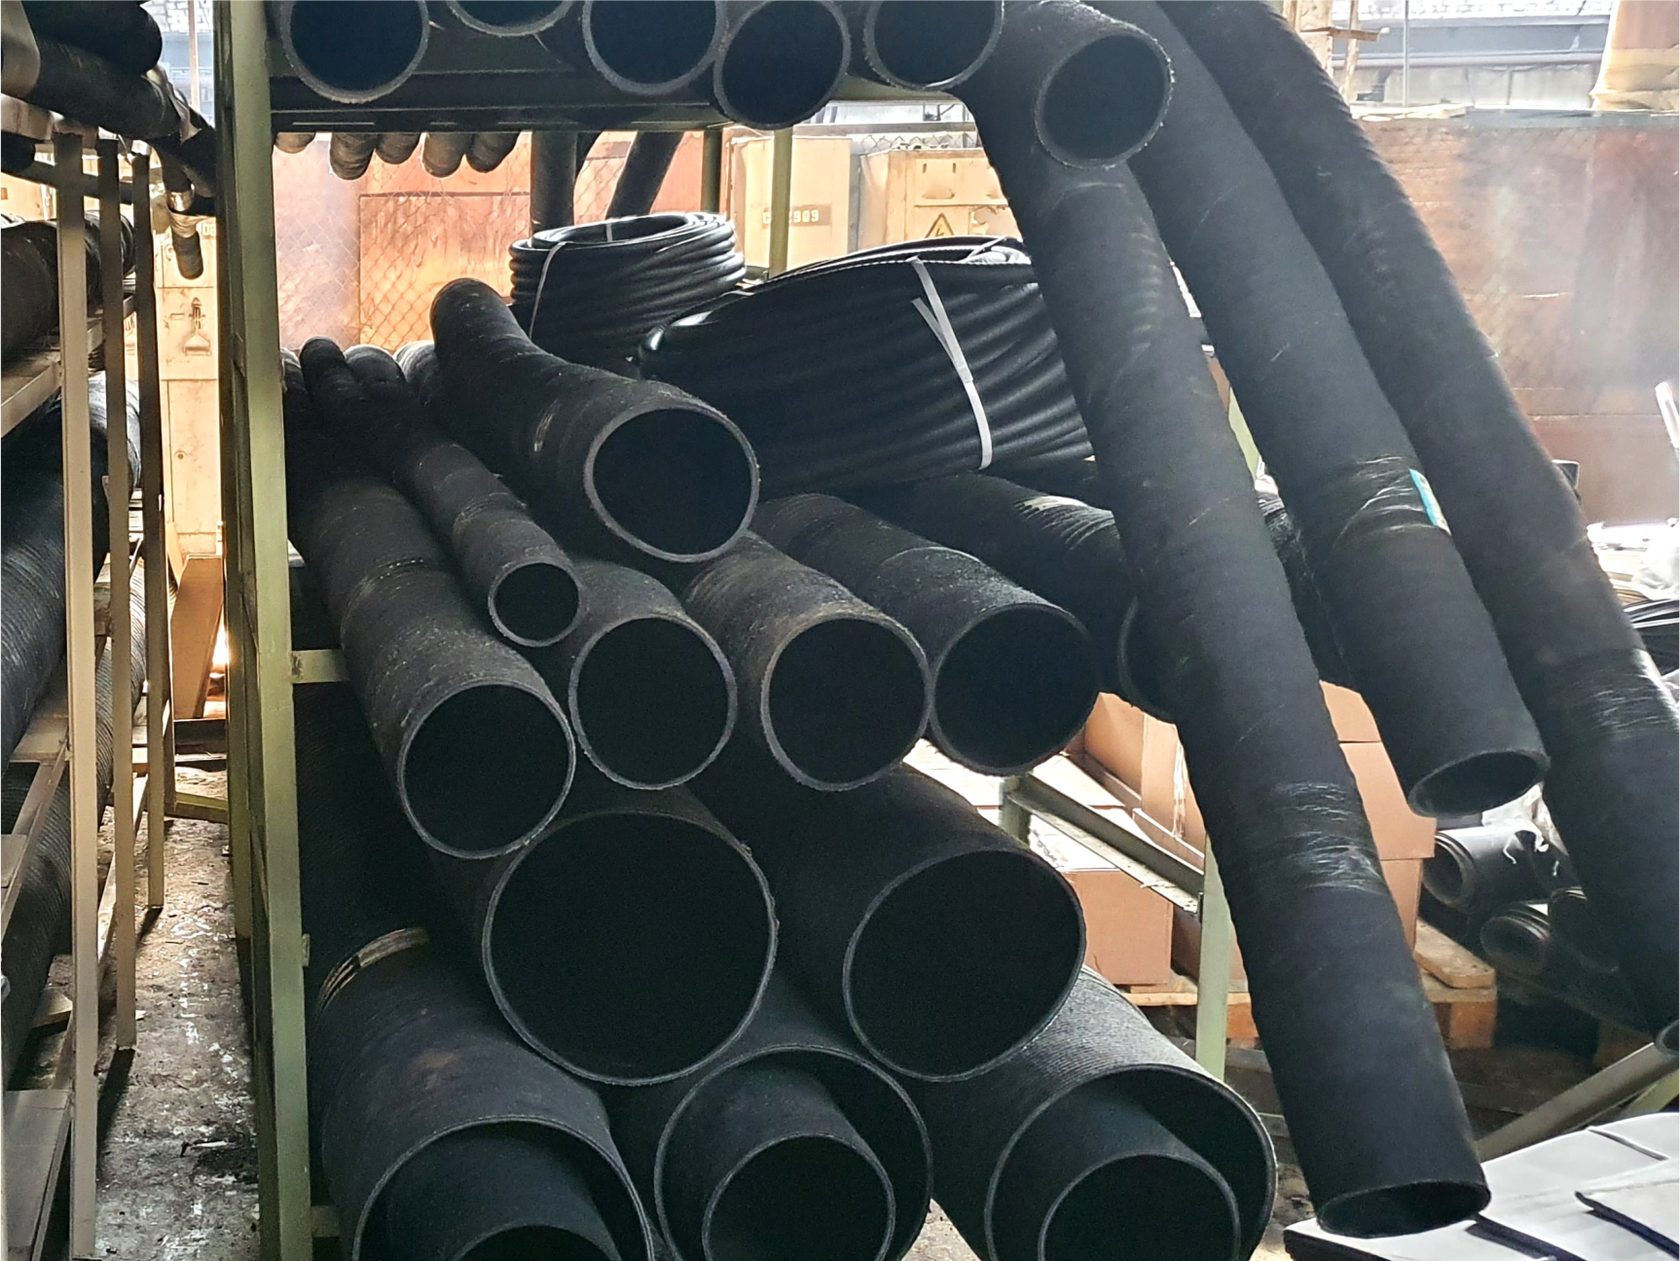 Suction-delivery hoses